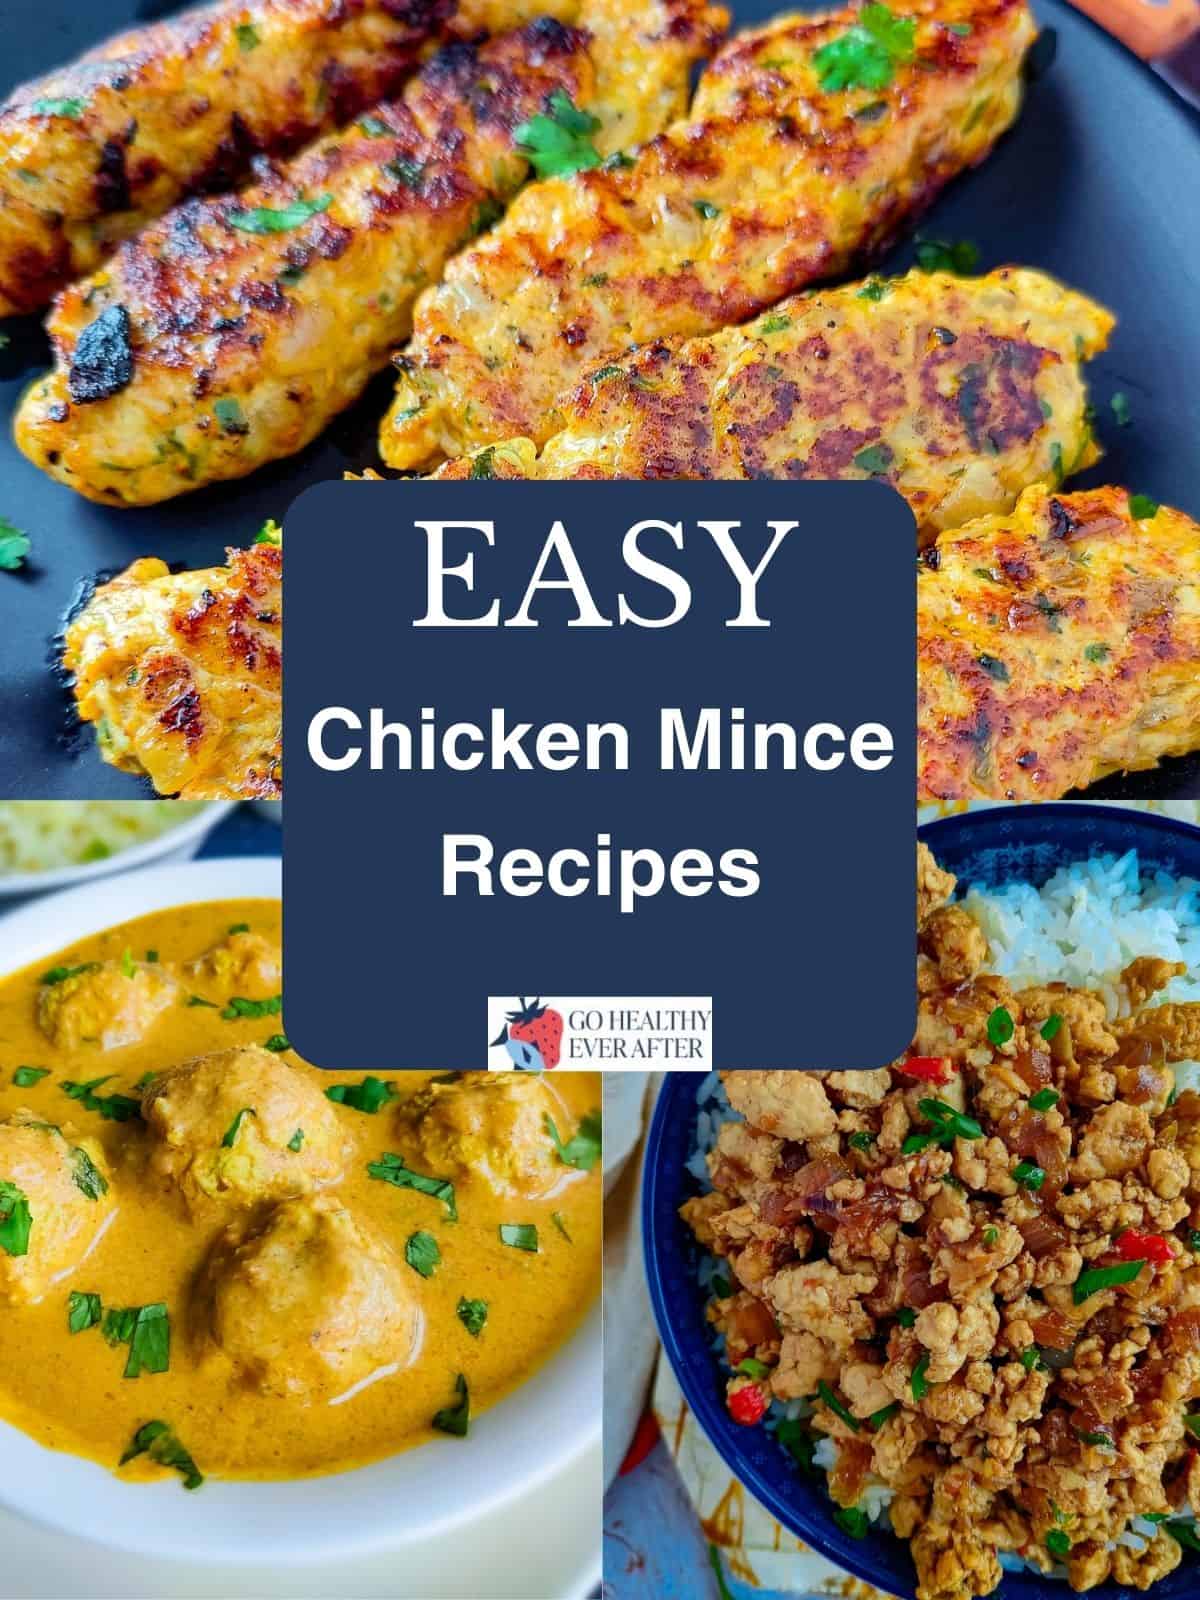 Easy chicken mince recipes: stir-fry, kebabs, and kofta curry.